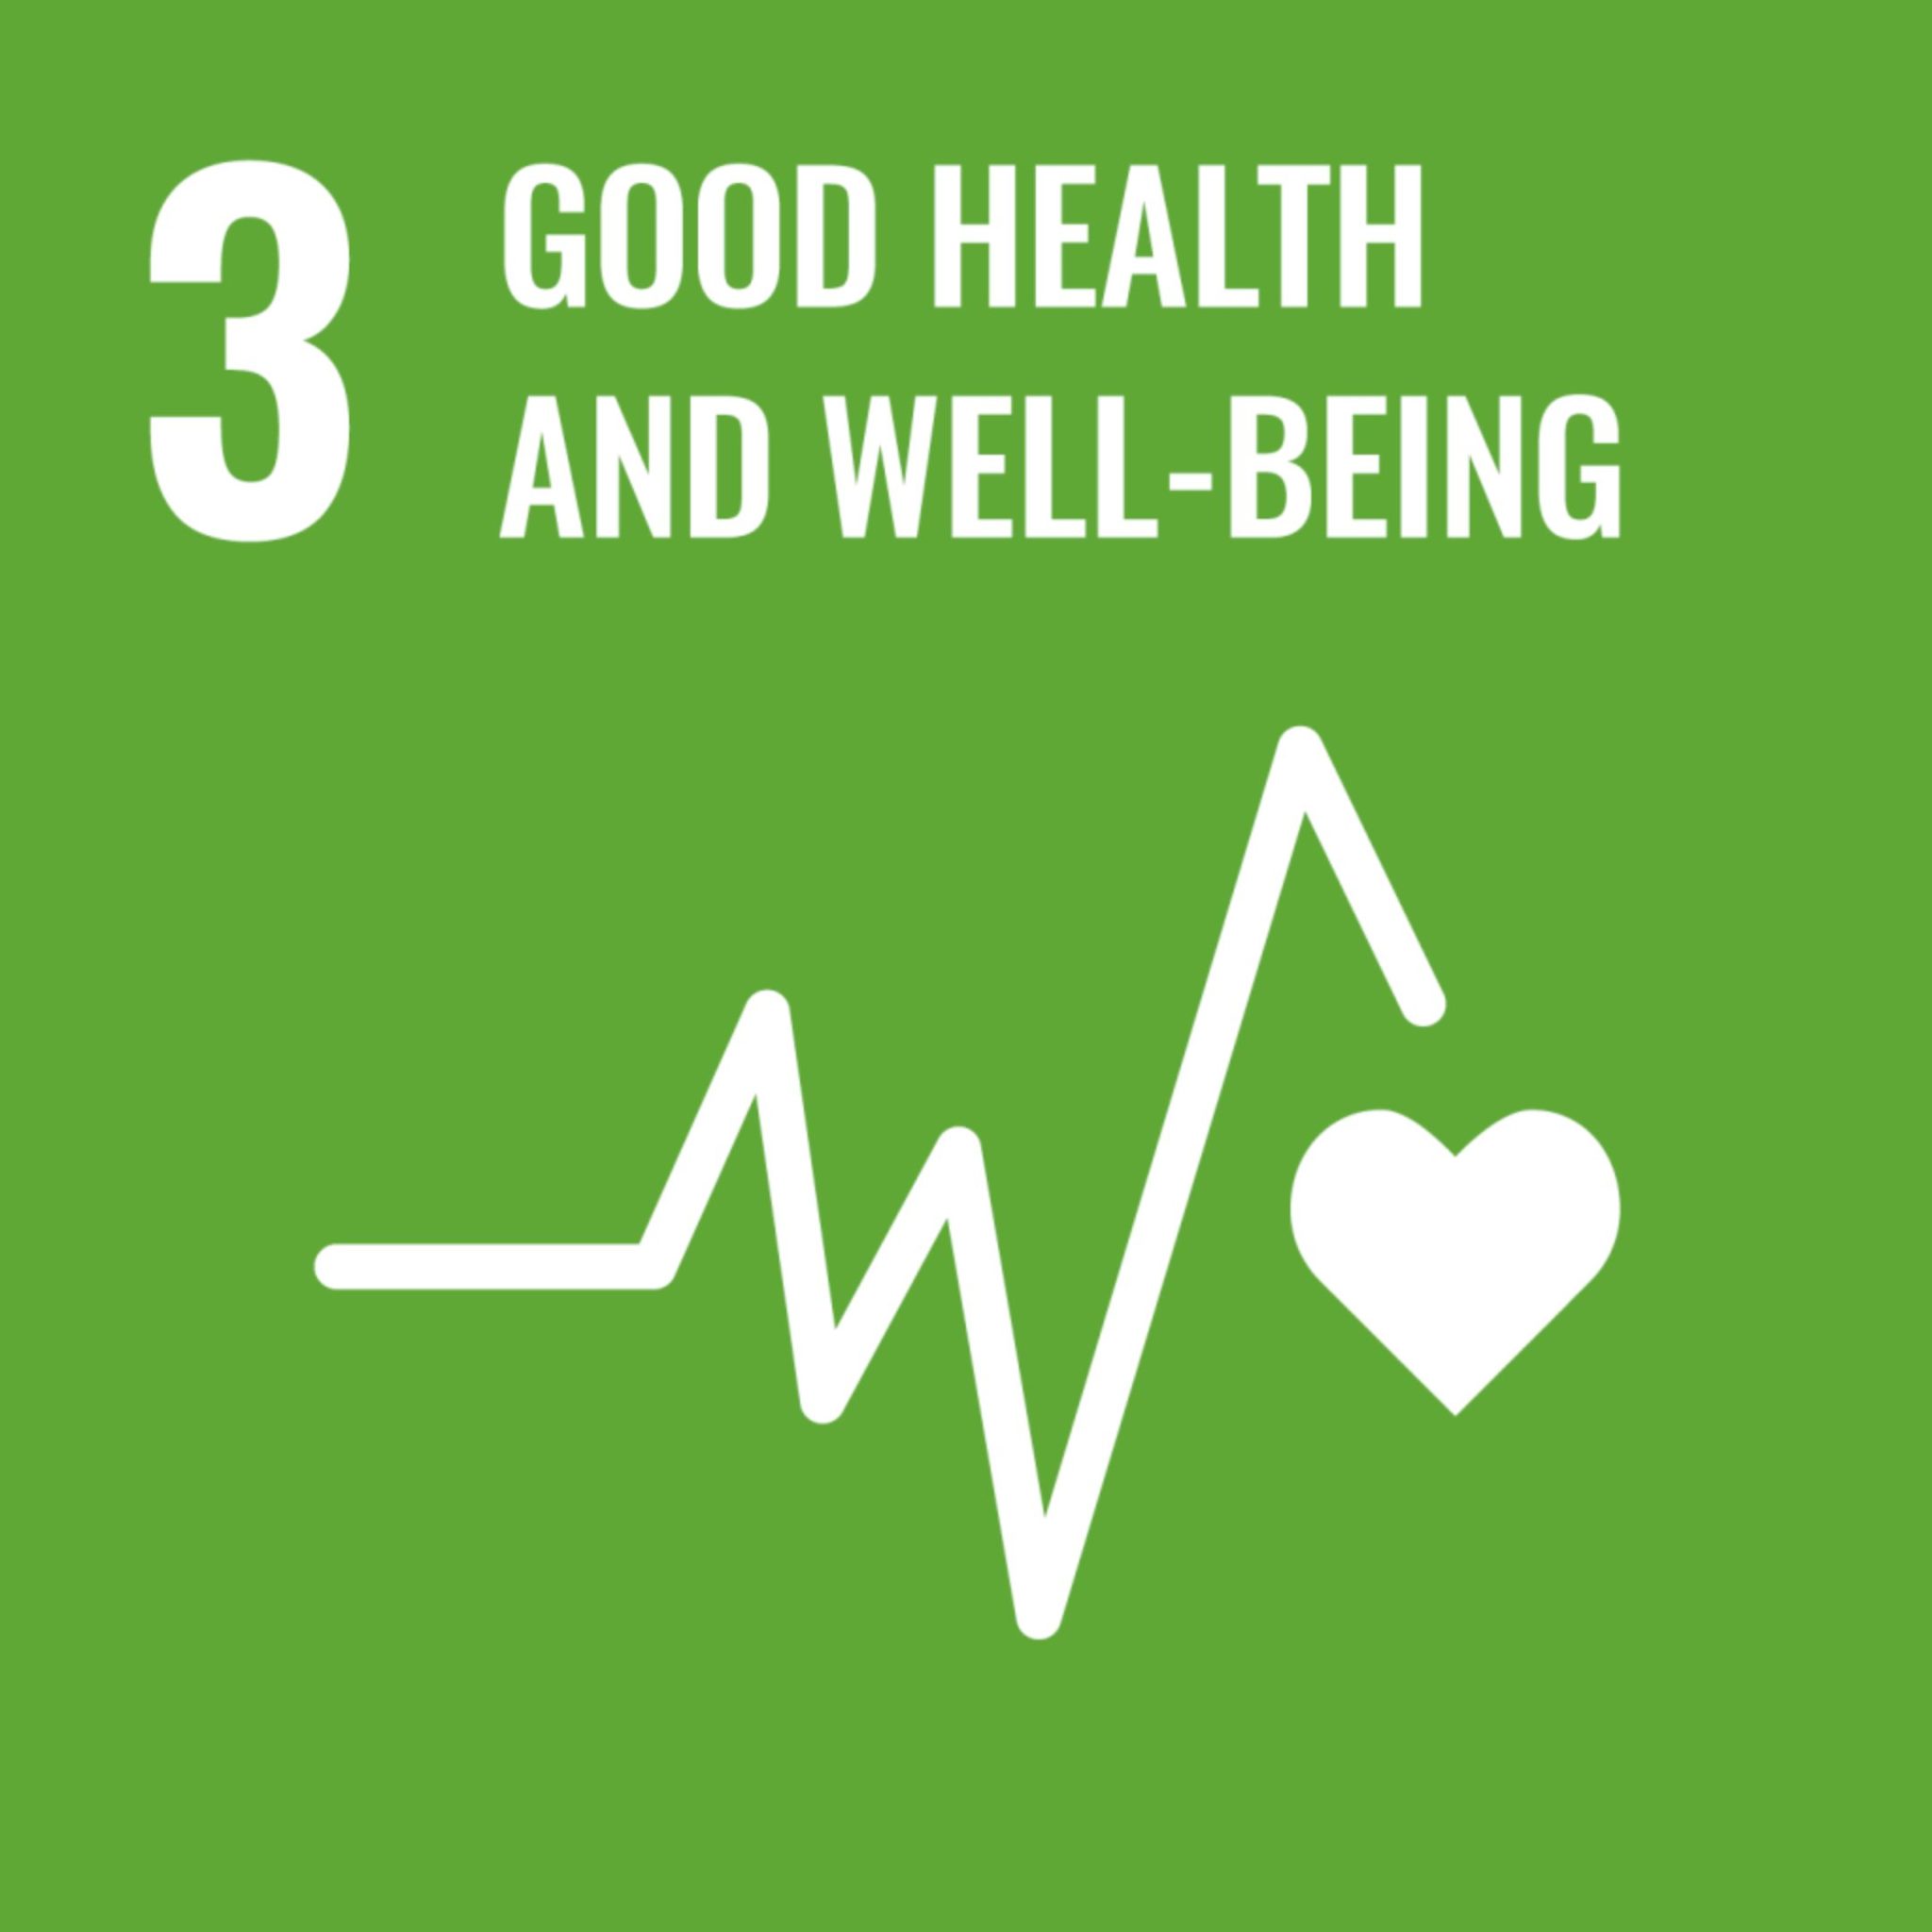 God Health Well-being Eu sustainable goals